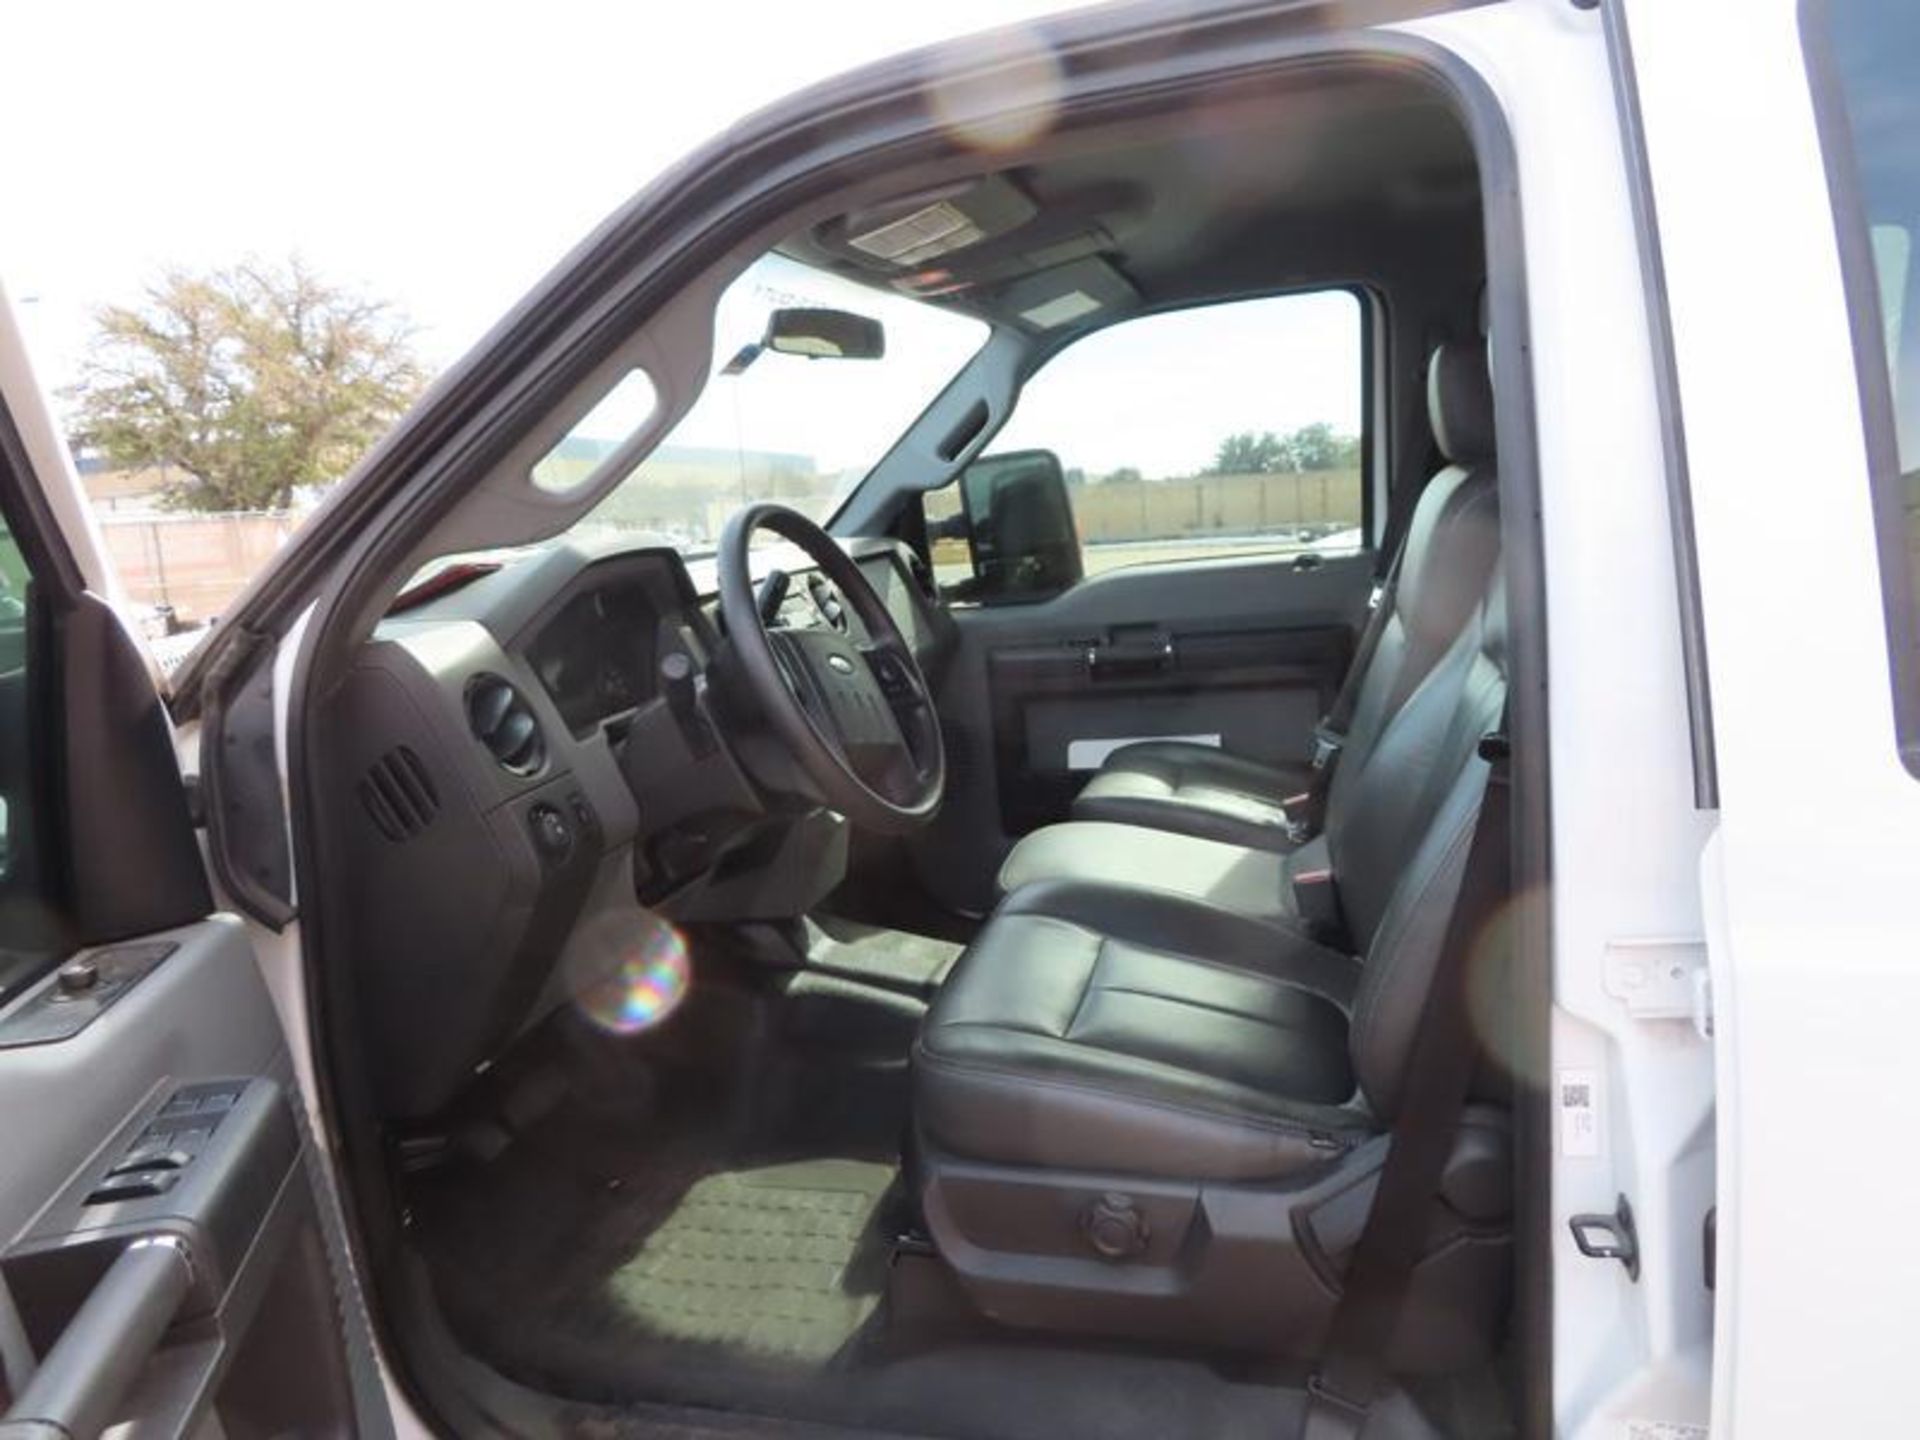 2014 Ford F-250 Xl Super Duty 8' Pickup Truck - Image 12 of 20